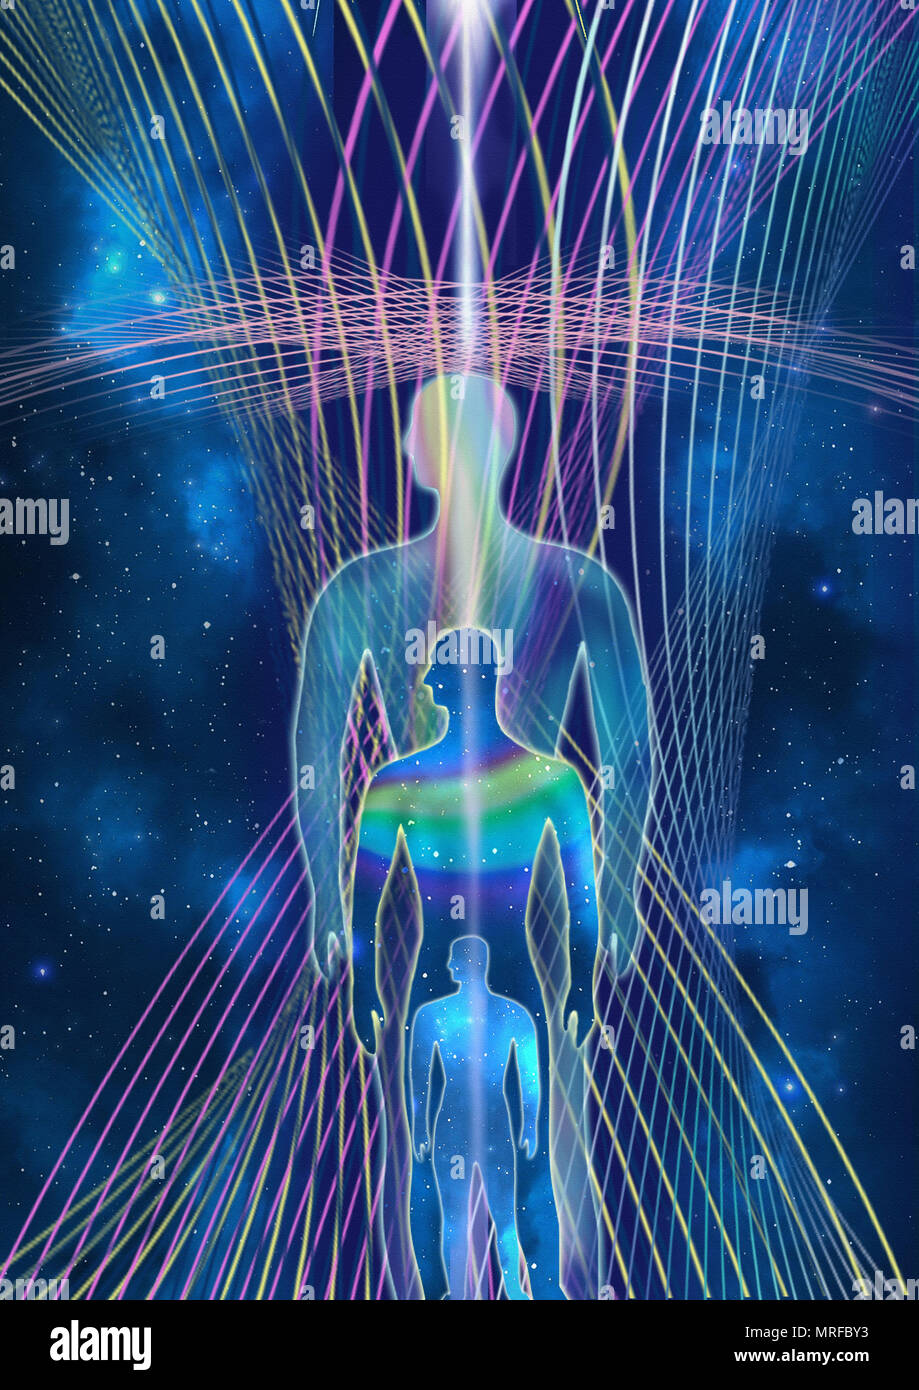 Consciousness evolution - abstract illustration. Human with universe on space star and energy fields background. Stock Photo